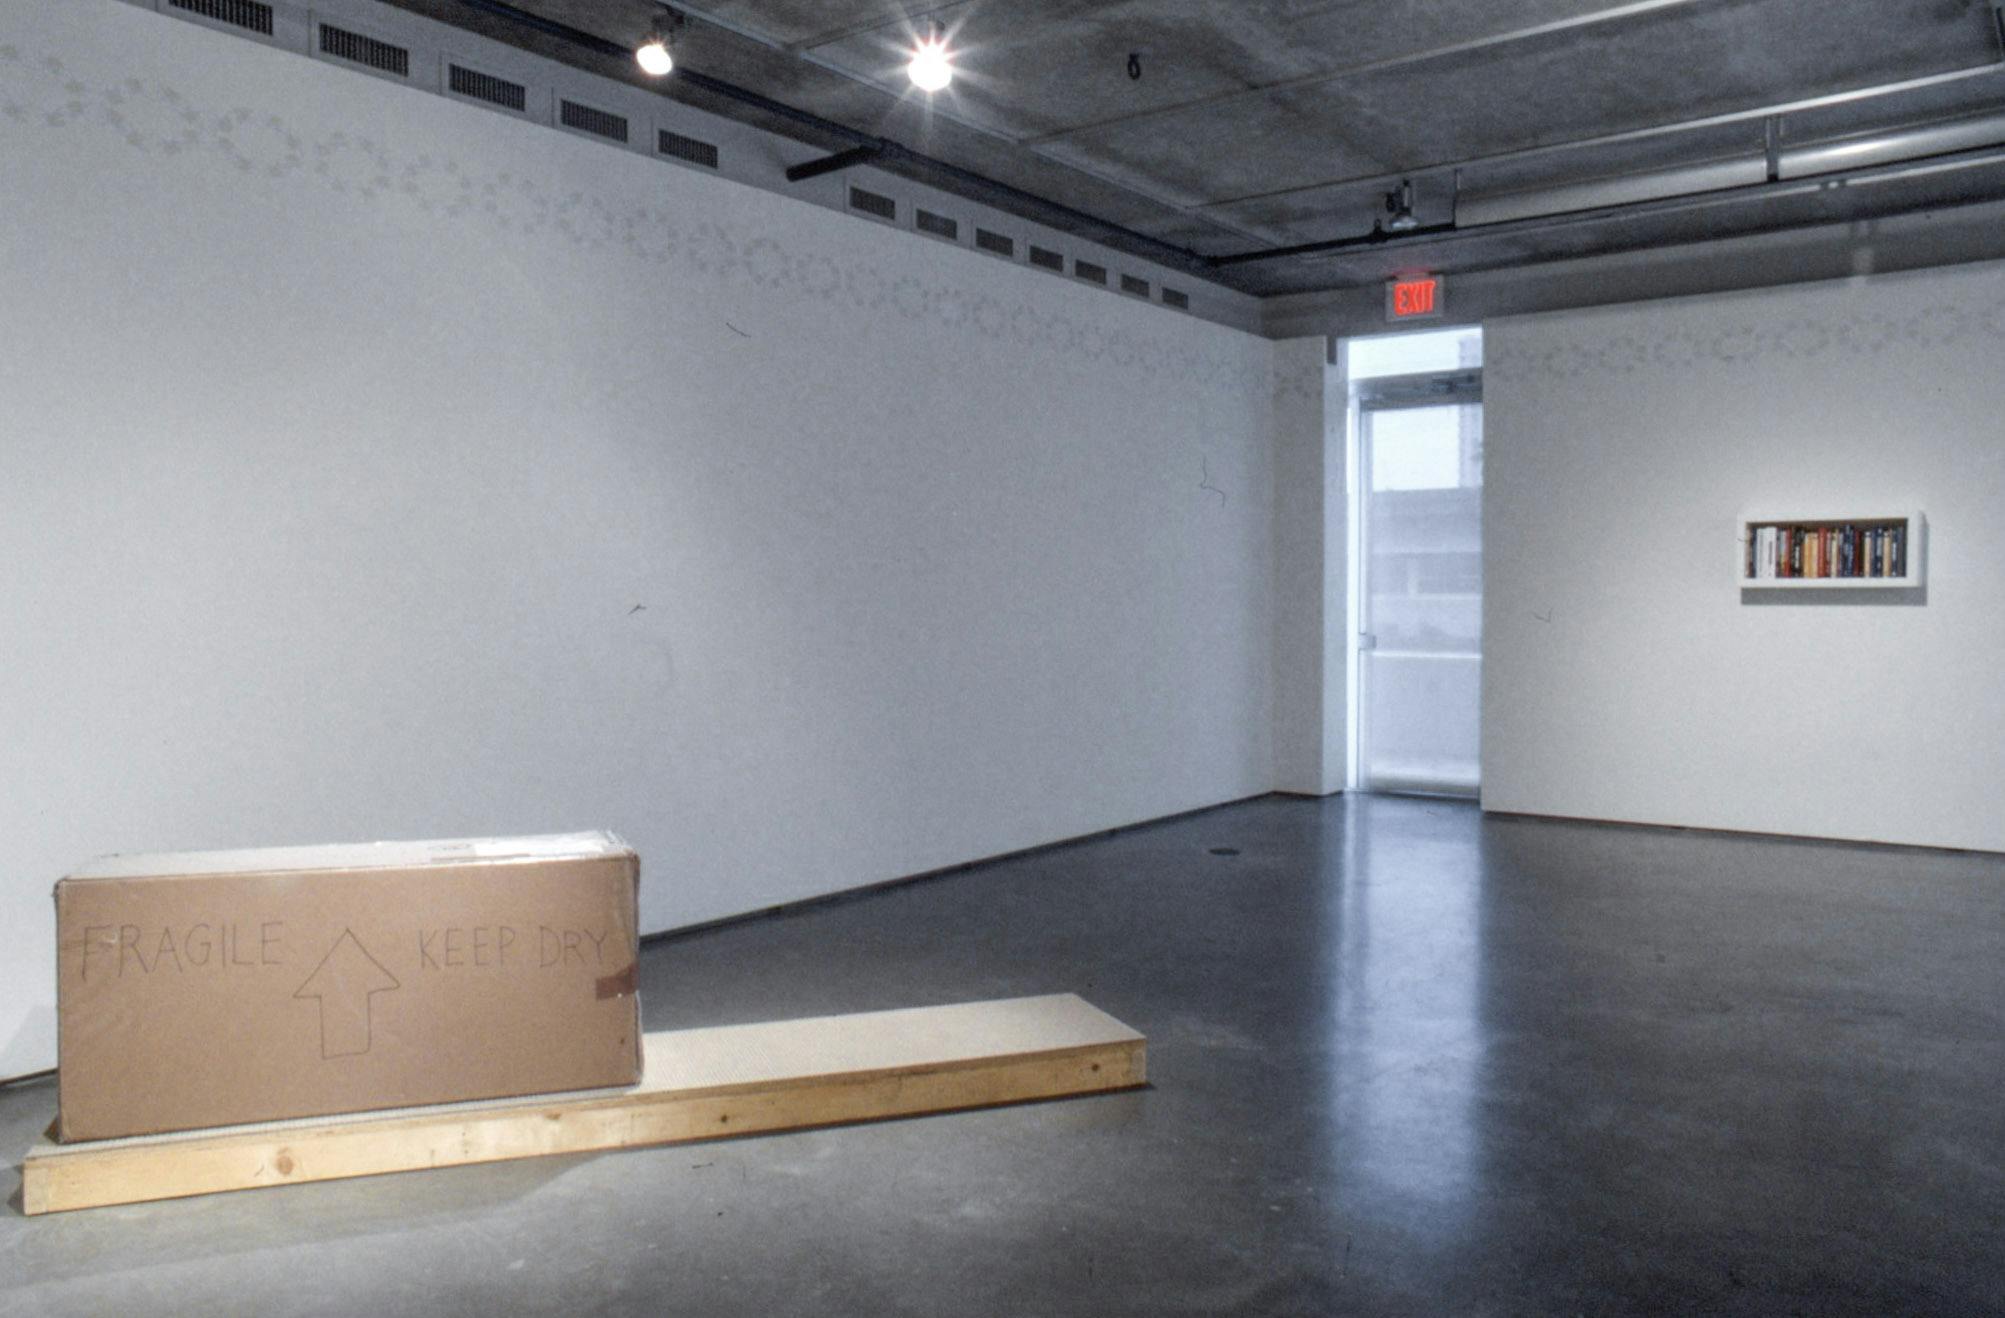 A large sculpture is installed in a gallery. The sculpture is a sealed large cardboard box placed on a piece of flat wood. Words such as Fragile and Keep Dry are written on the side of the box.